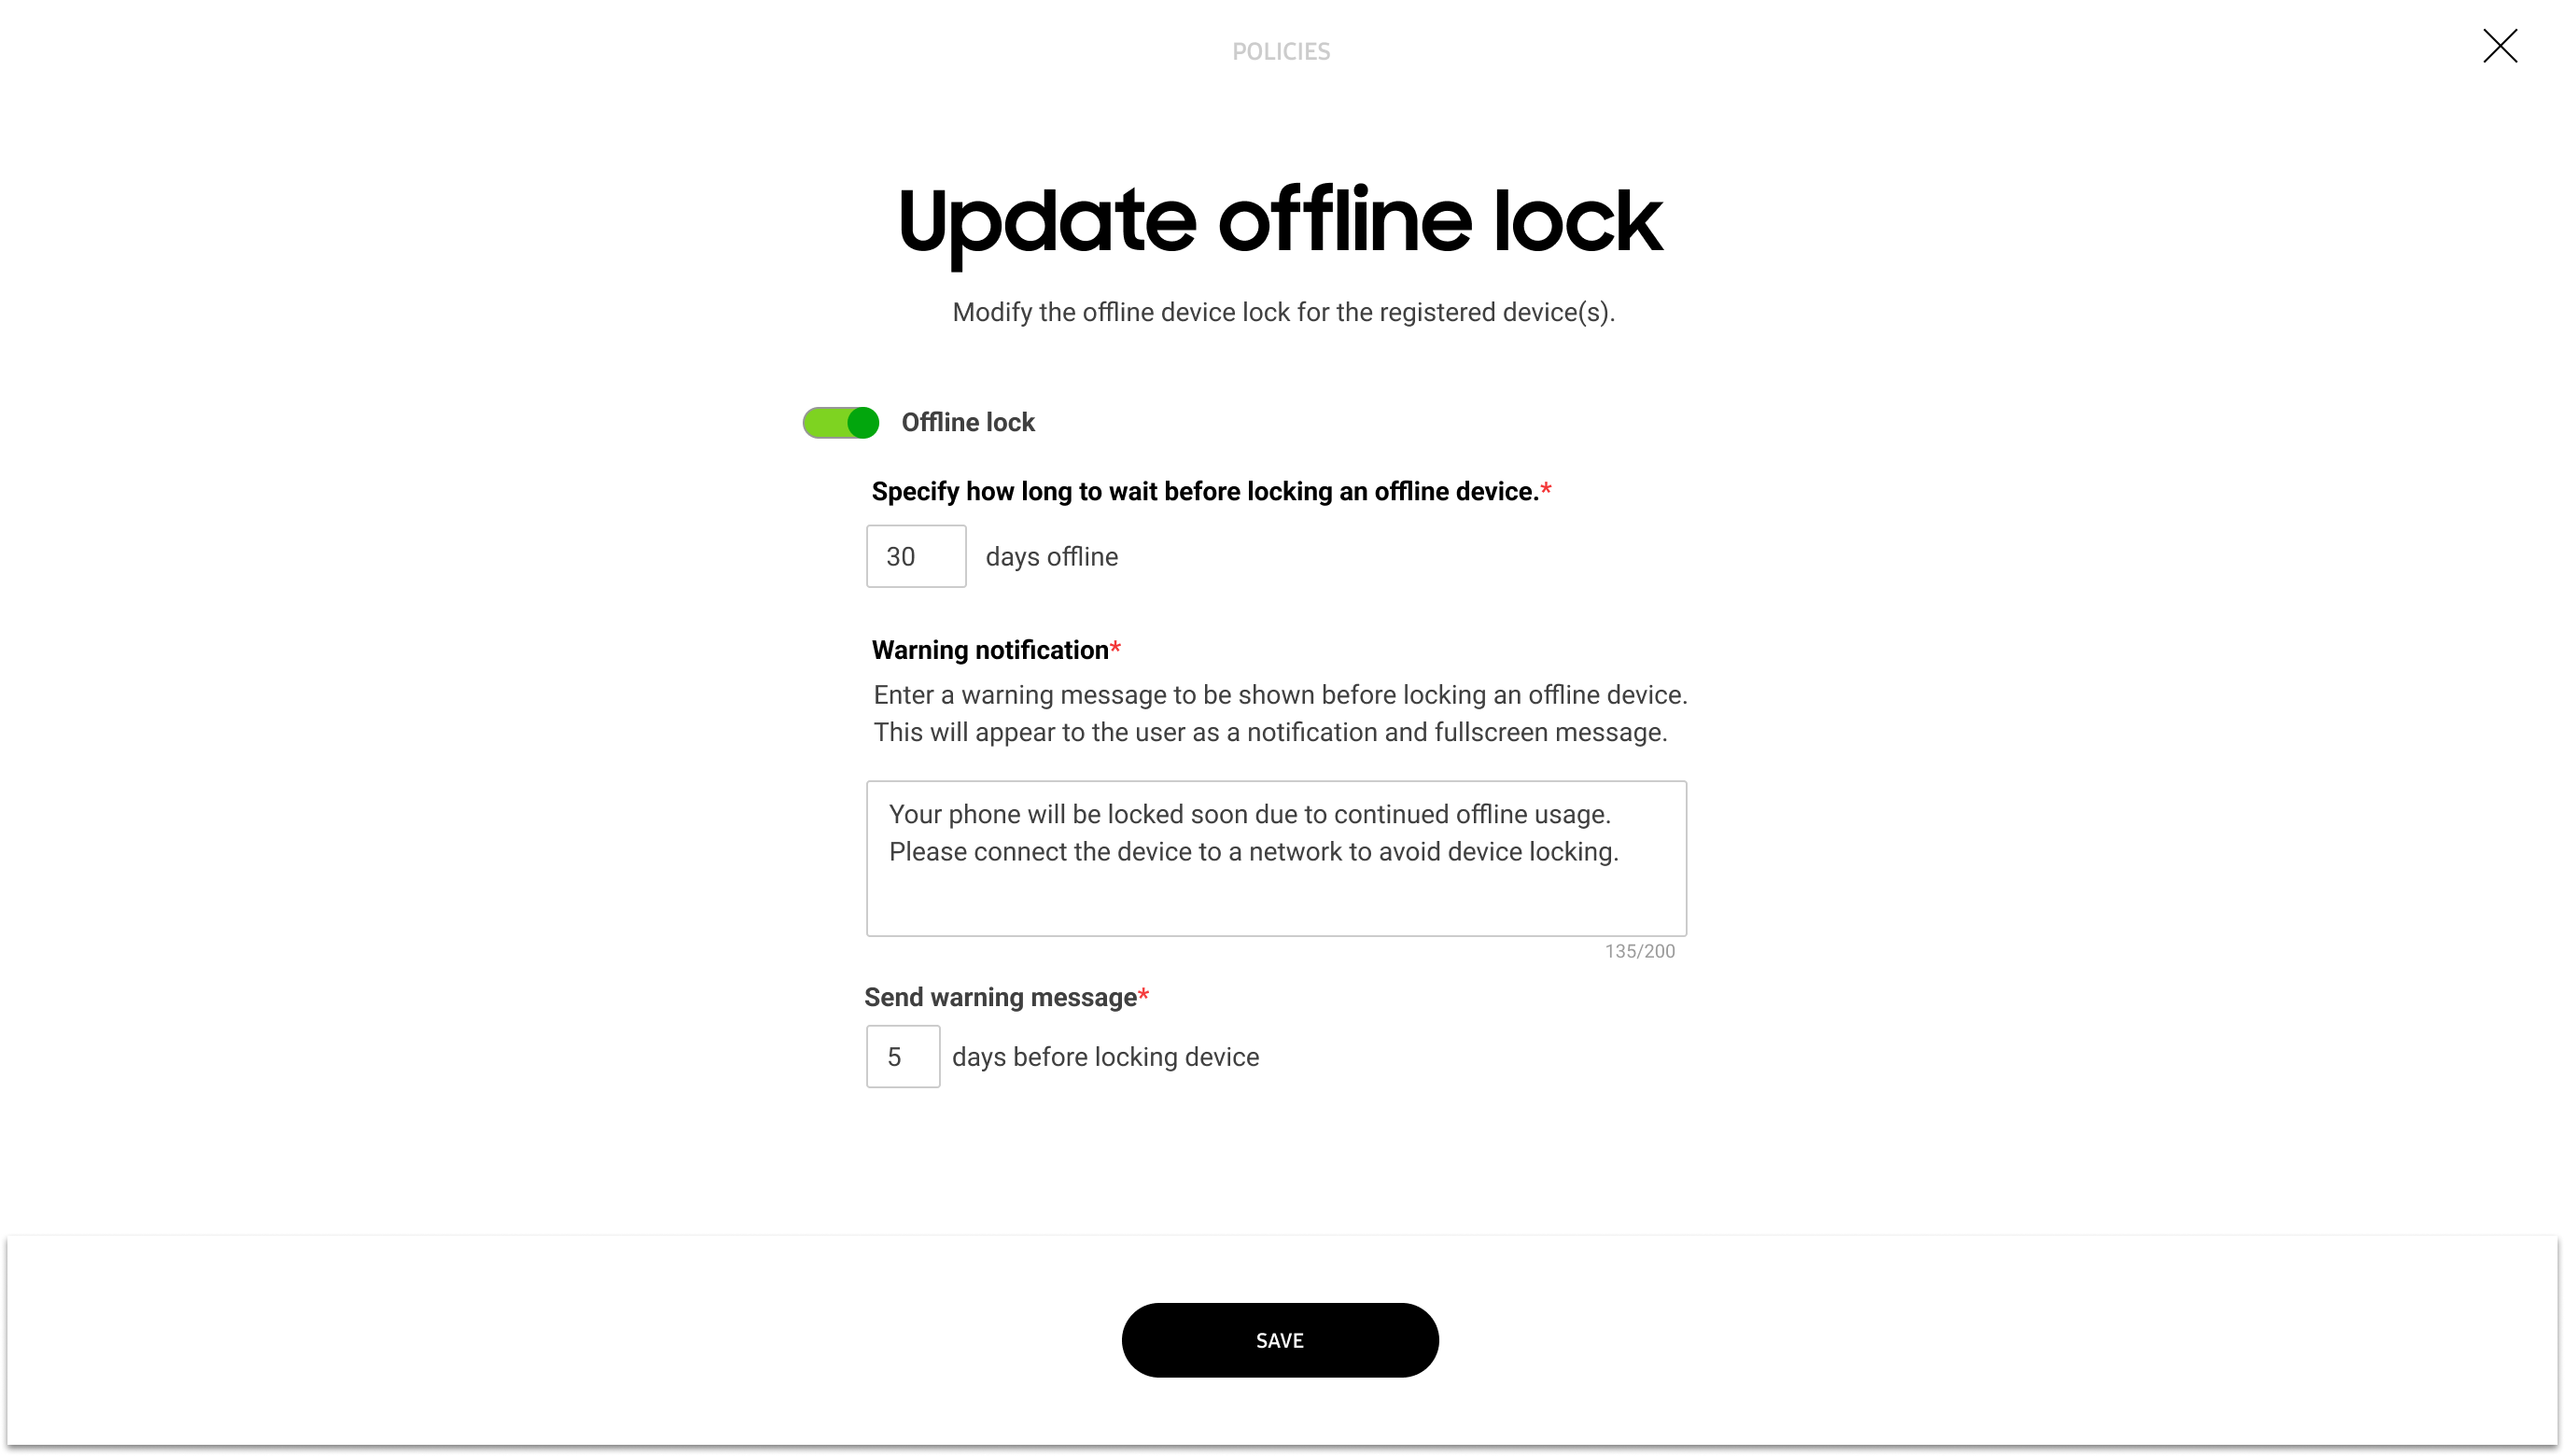 Update offline lock page showing the configuration options